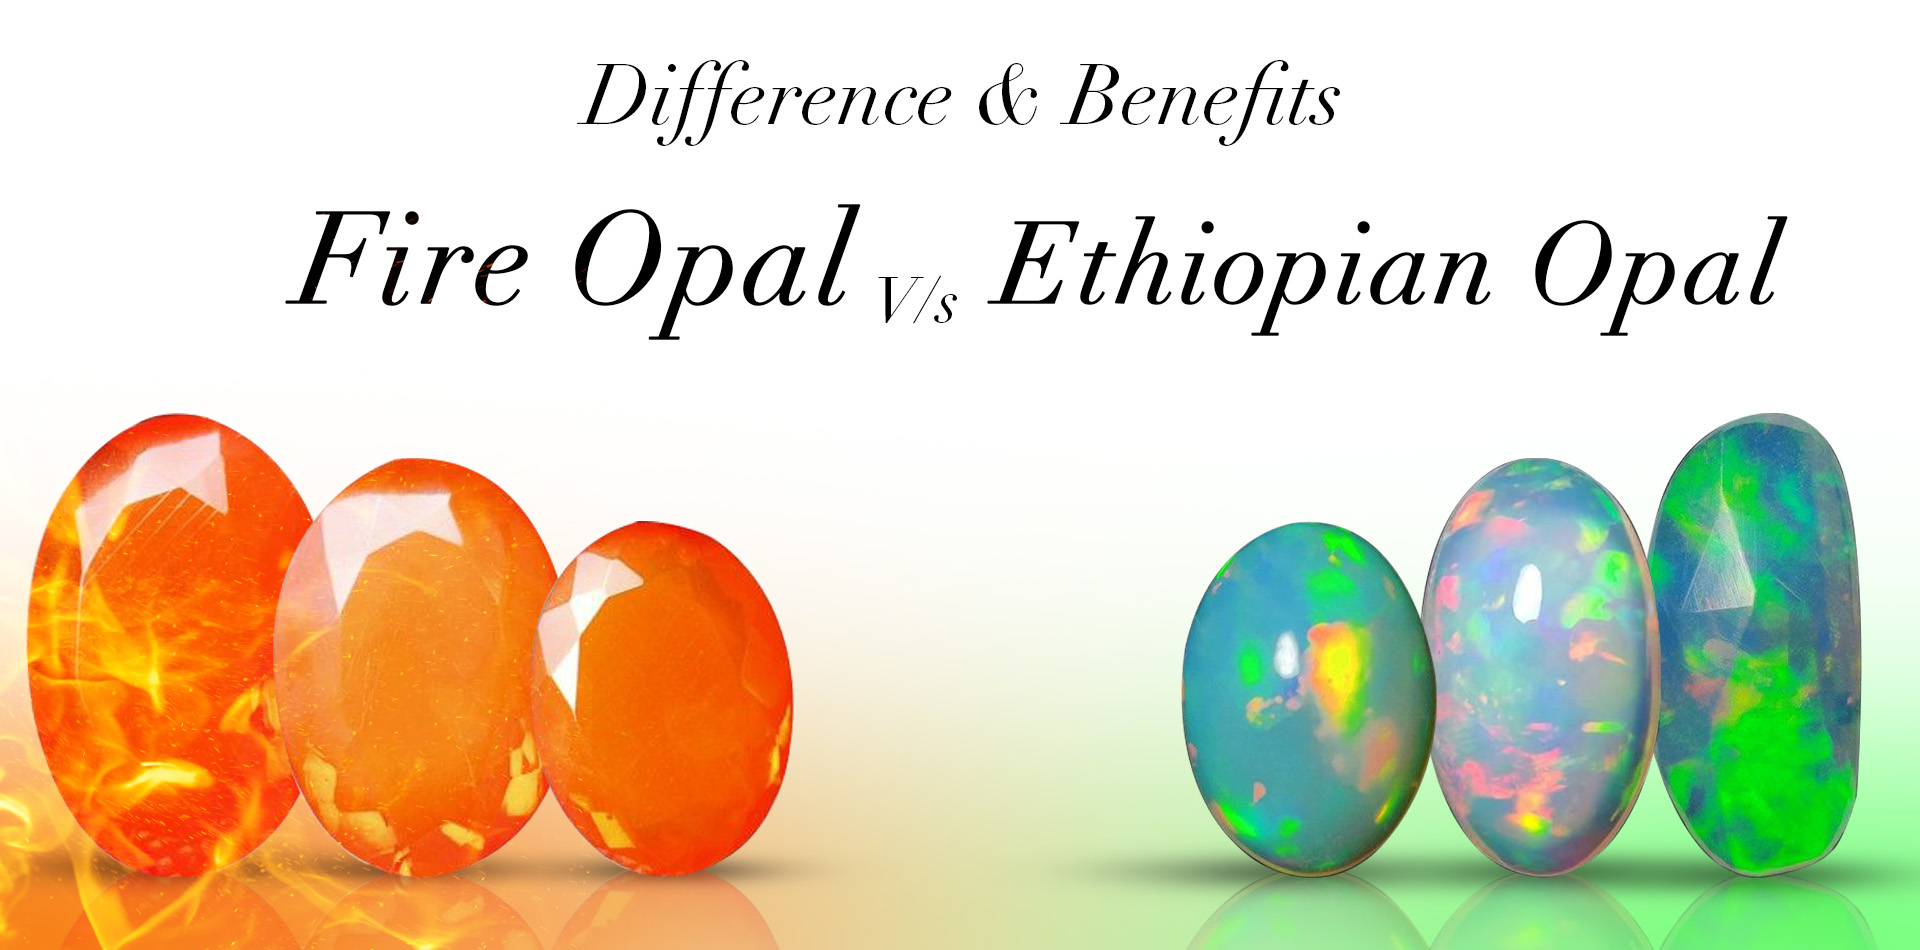 Fire Opal Vs Ethiopian Opal: Difference & Benefits